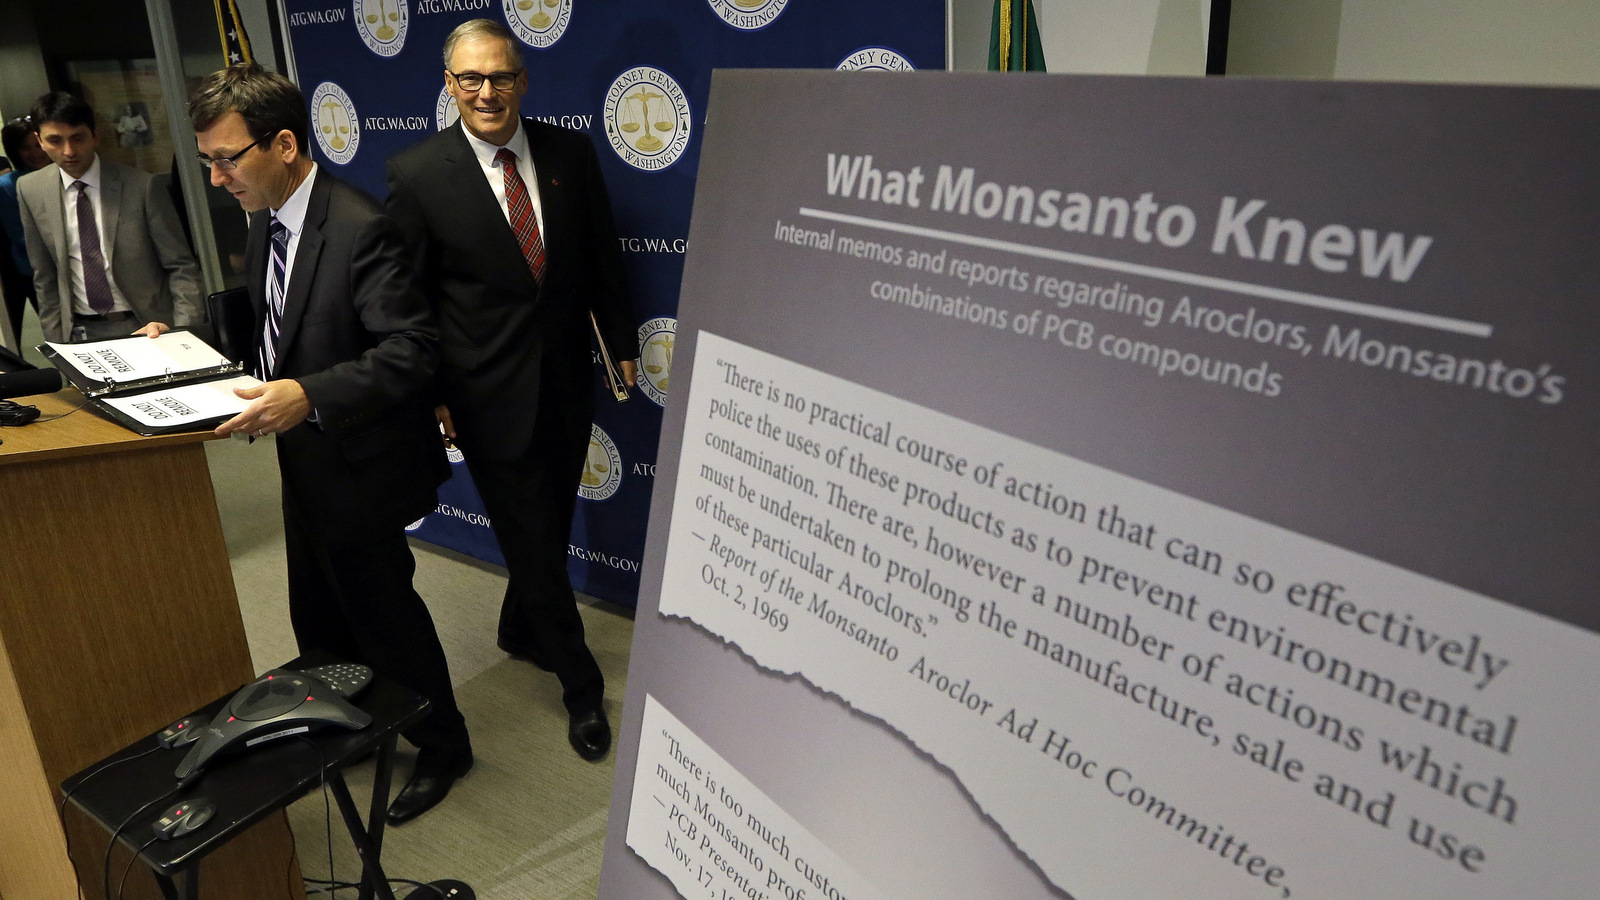 Washington says it's the first U.S. state to sue Monsanto over pollution from PCBs. The chemicals, polychlorinated biphenyls, were used in many industrial and commercial applications, including in paint, coolants, sealants and hydraulic fluids. PCB contamination impairs rivers, lakes and bays around the country. 